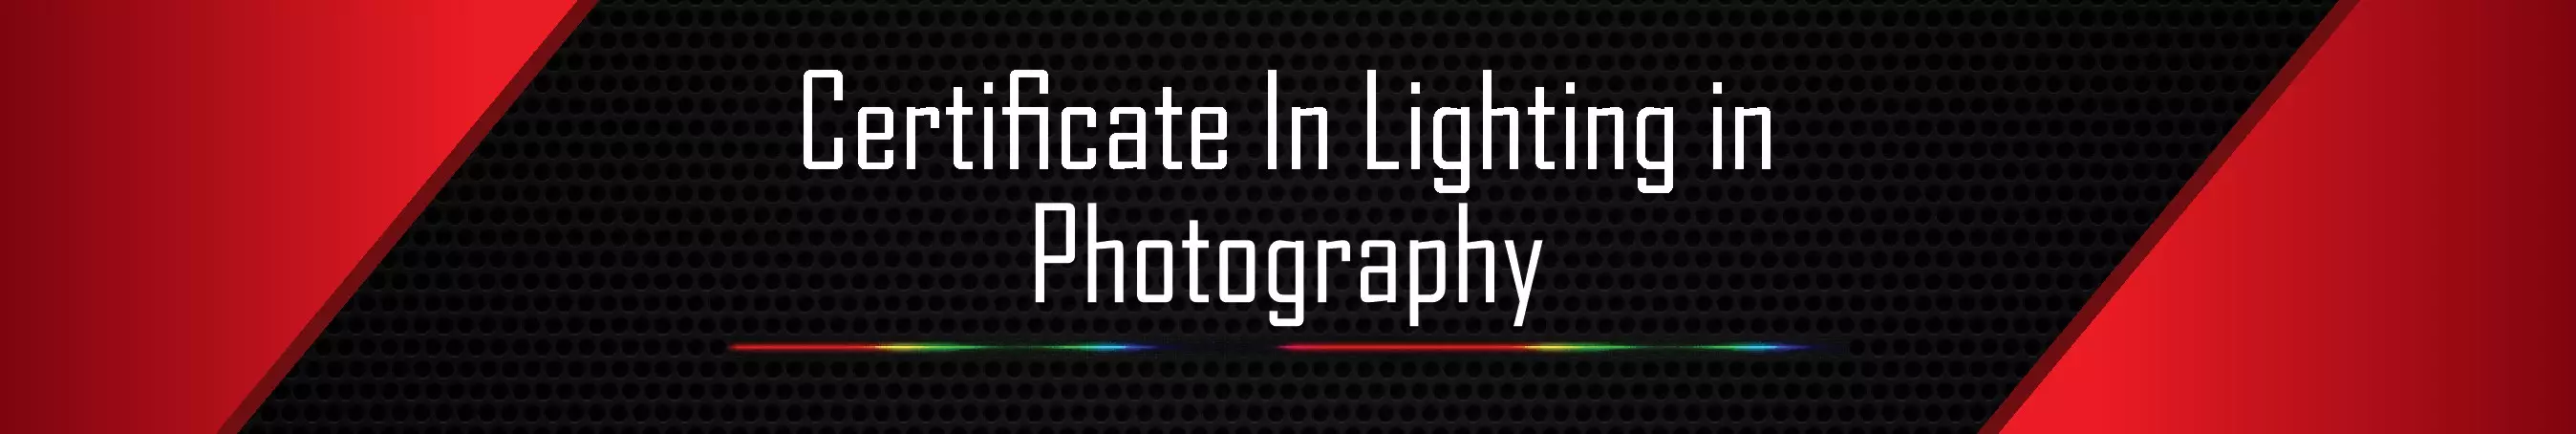 Certificate in lighting photography